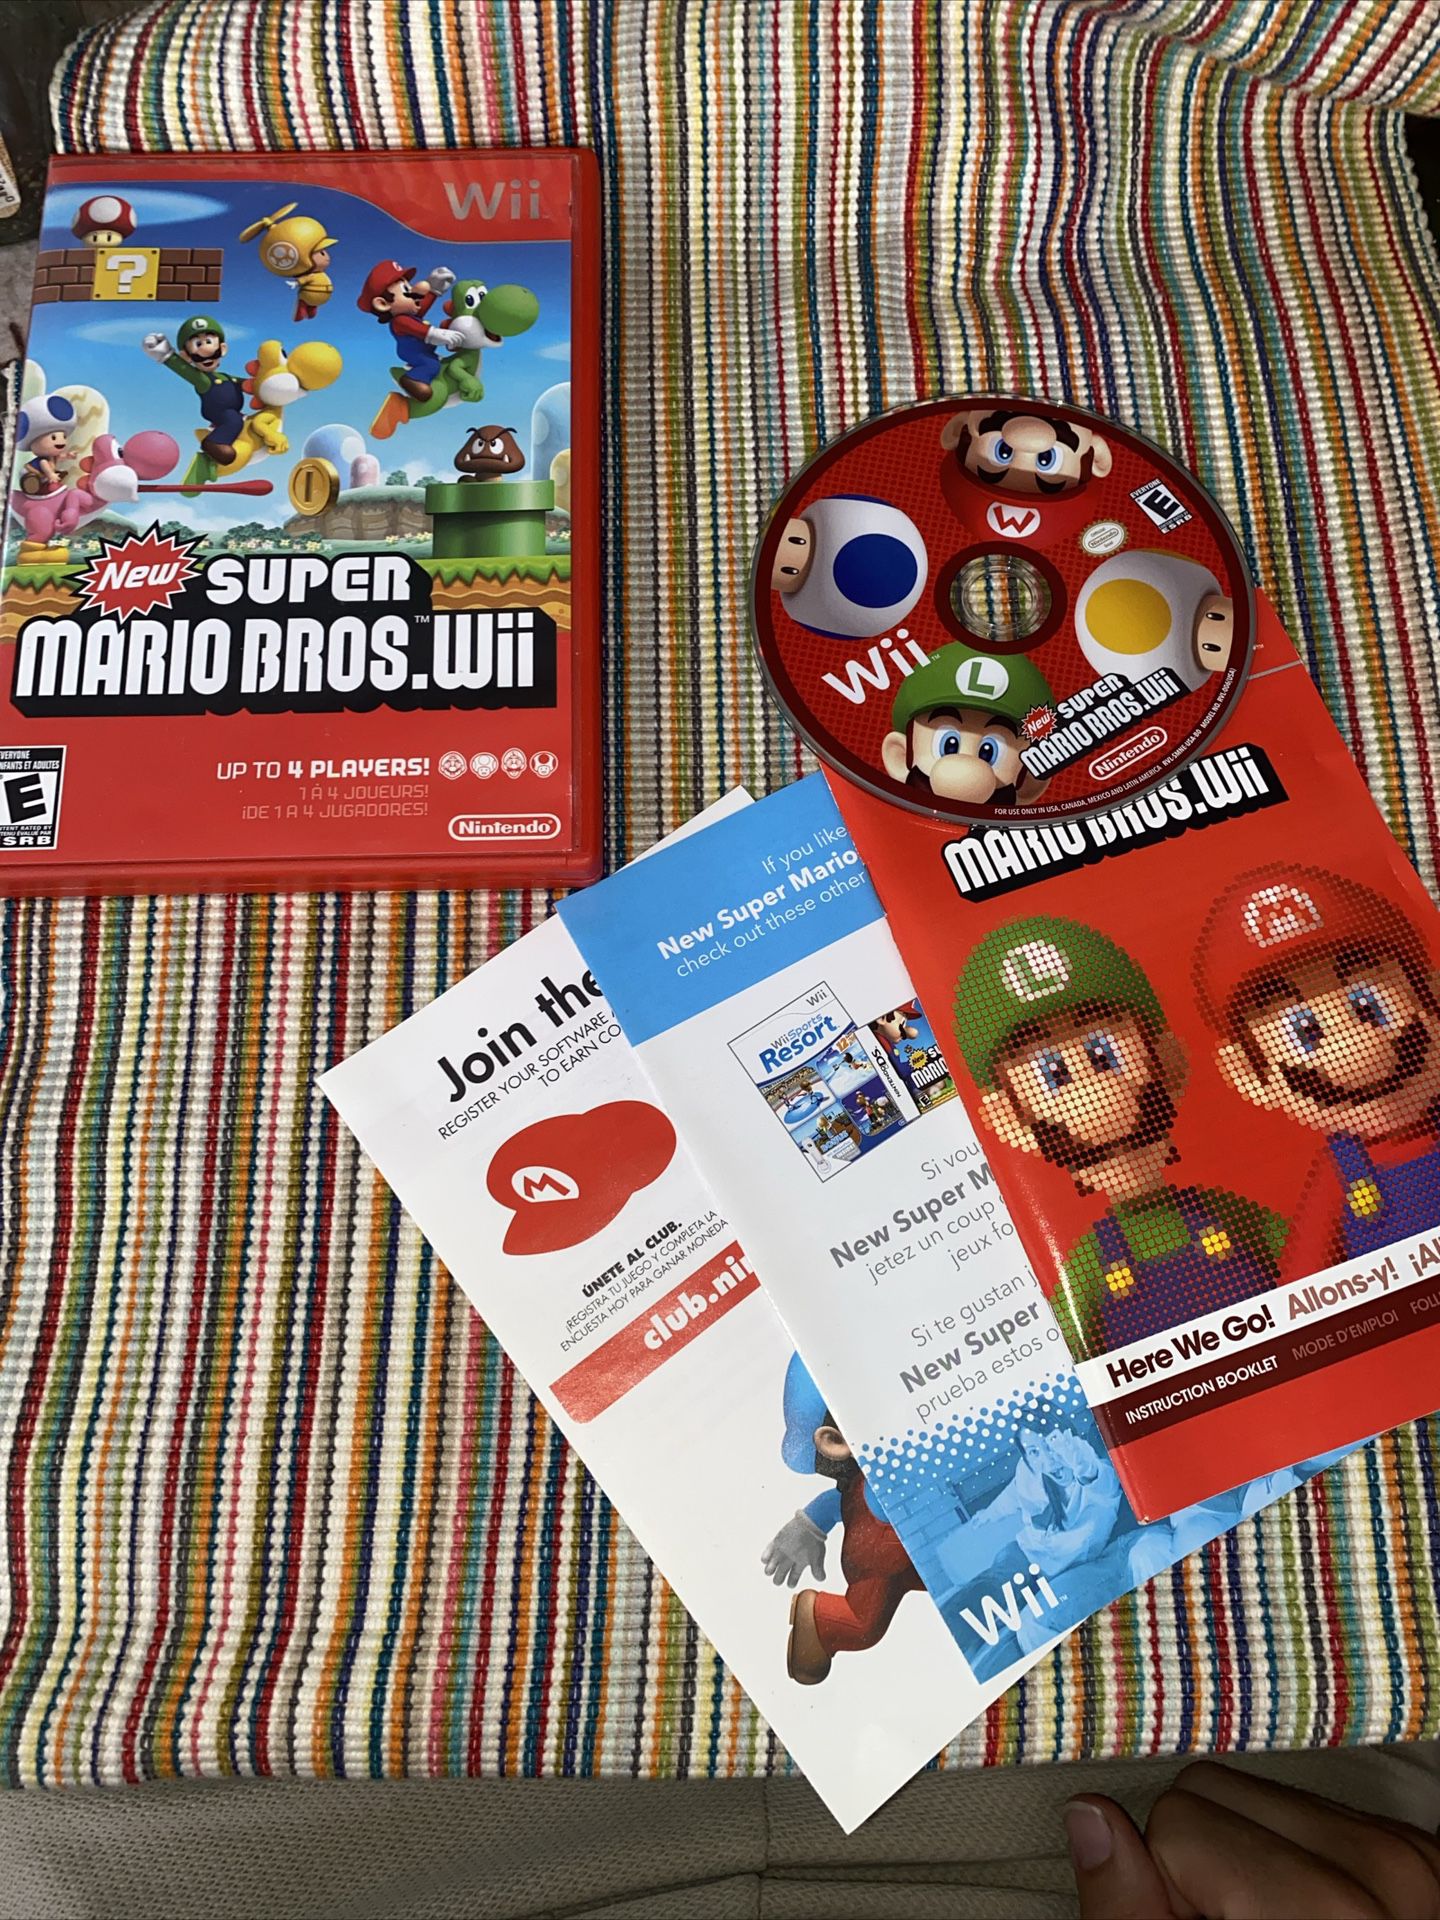 New Super Mario Bros Wii Game Nintendo Wii - Tested Works Complete CIB Manual